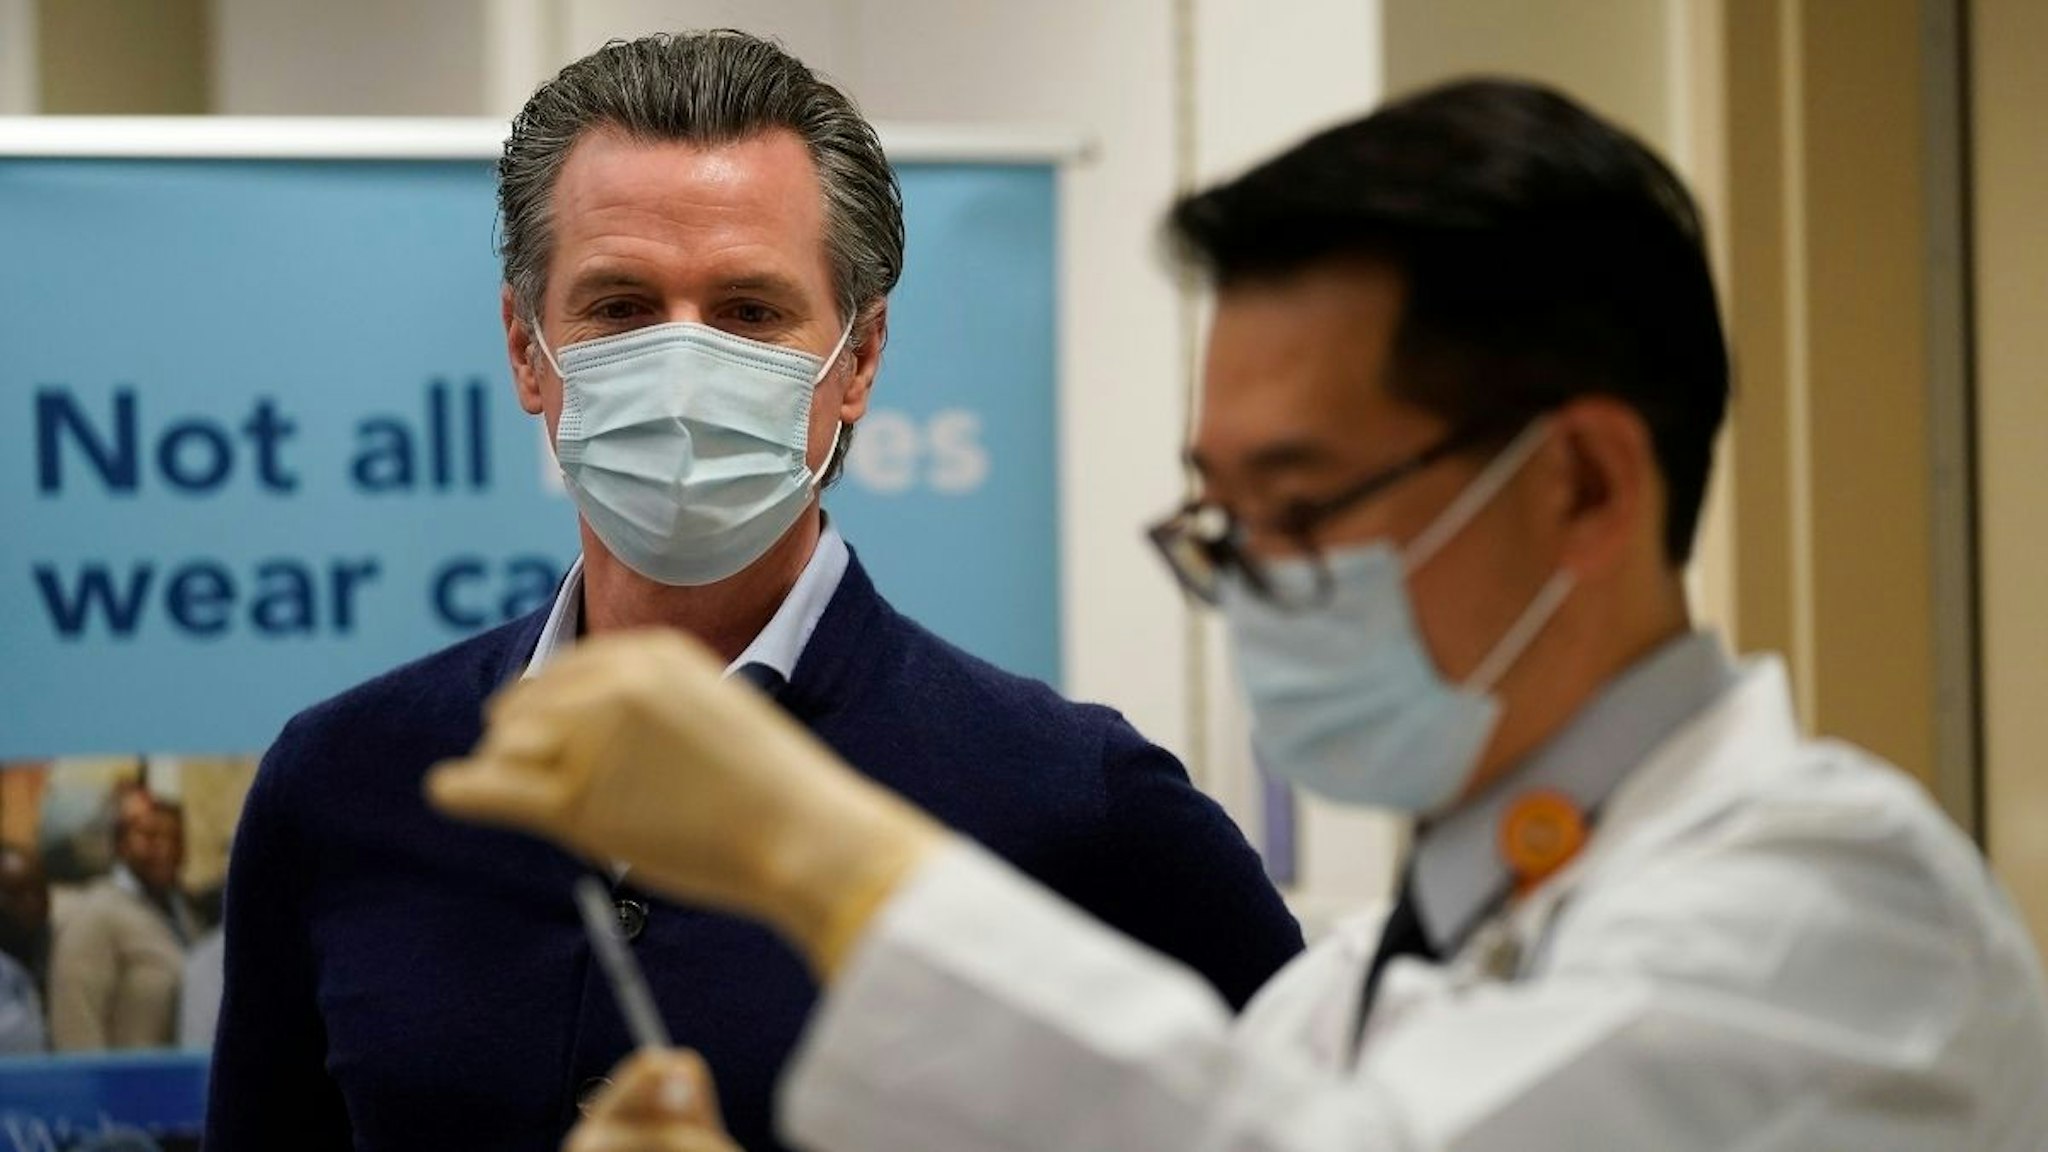 Gov. Gavin Newsom watches as the Pfizer-BioNTech COVID-19 vaccine is prepared by Director of Inpatient Pharmacy David Cheng at Kaiser Permanente Los Angeles Medical Center on December 14, 2020 in Los Angeles, California.